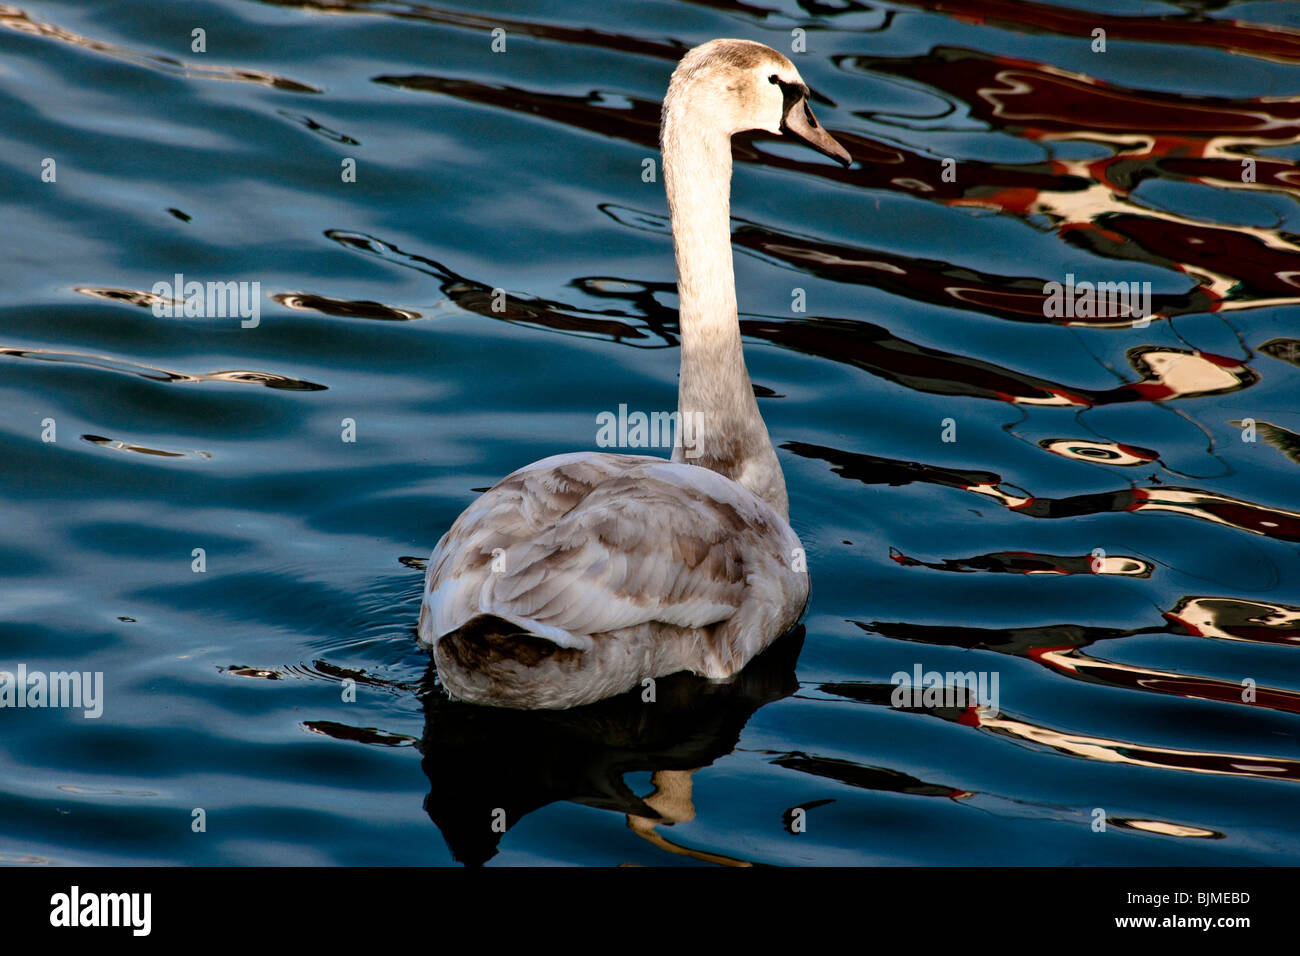 Abstract image of a mute swan Stock Photo